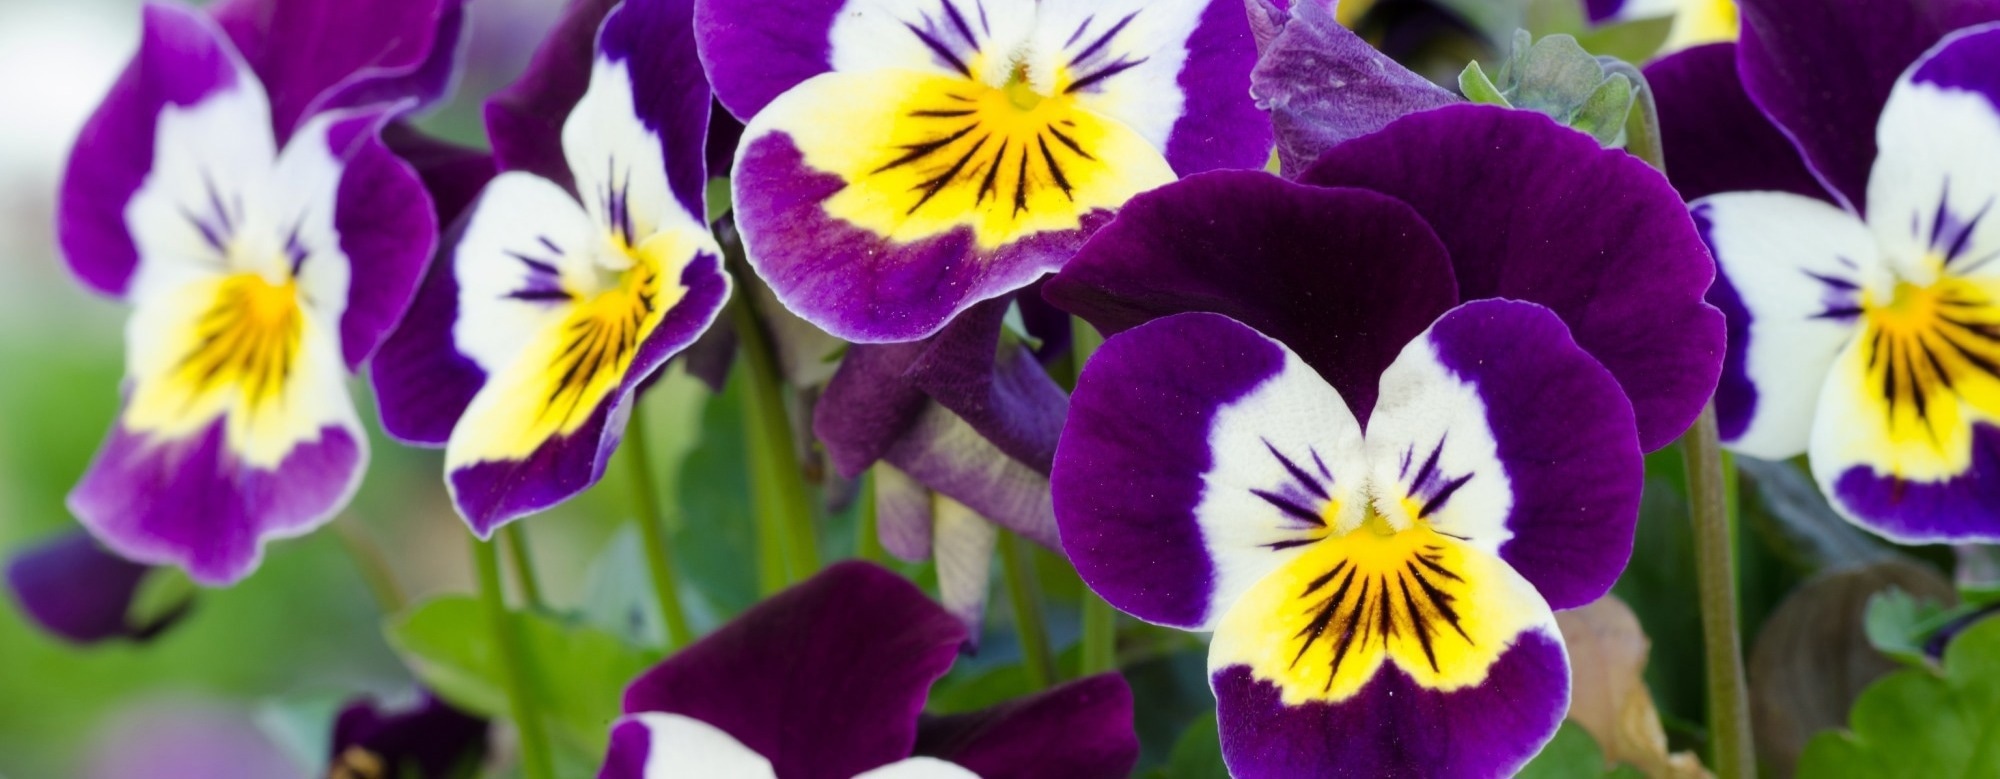 Edible flowers bloom with health benefits